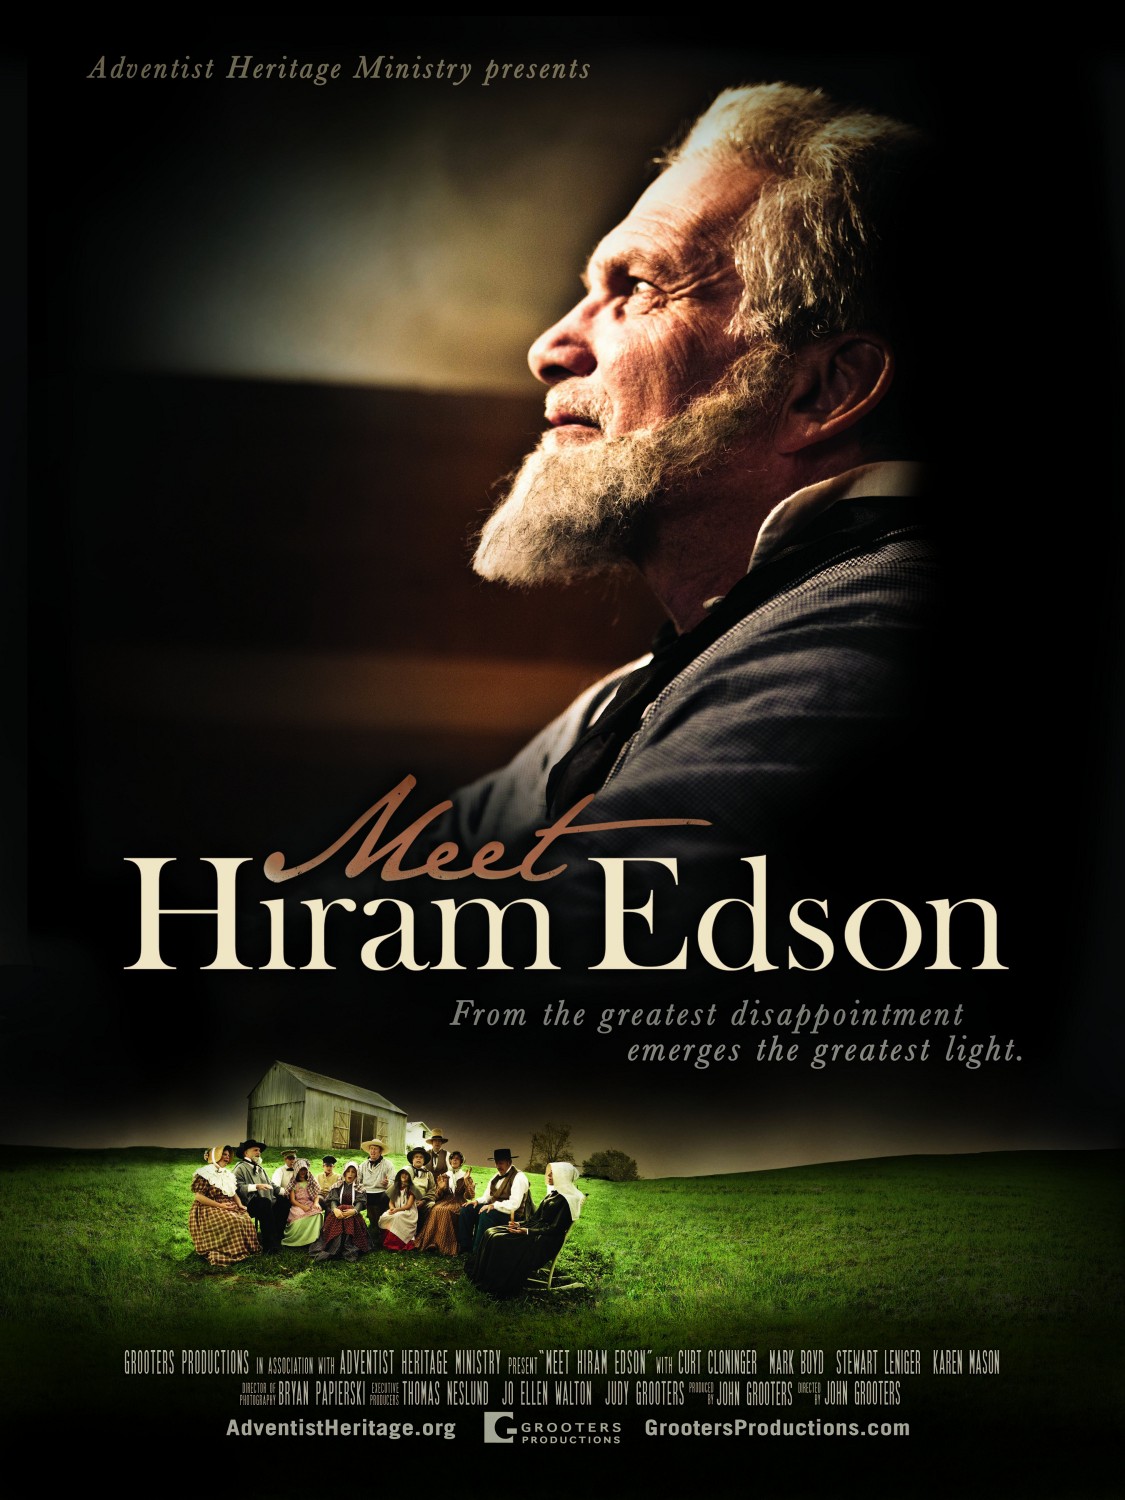 Extra Large Movie Poster Image for Meet Hiram Edson